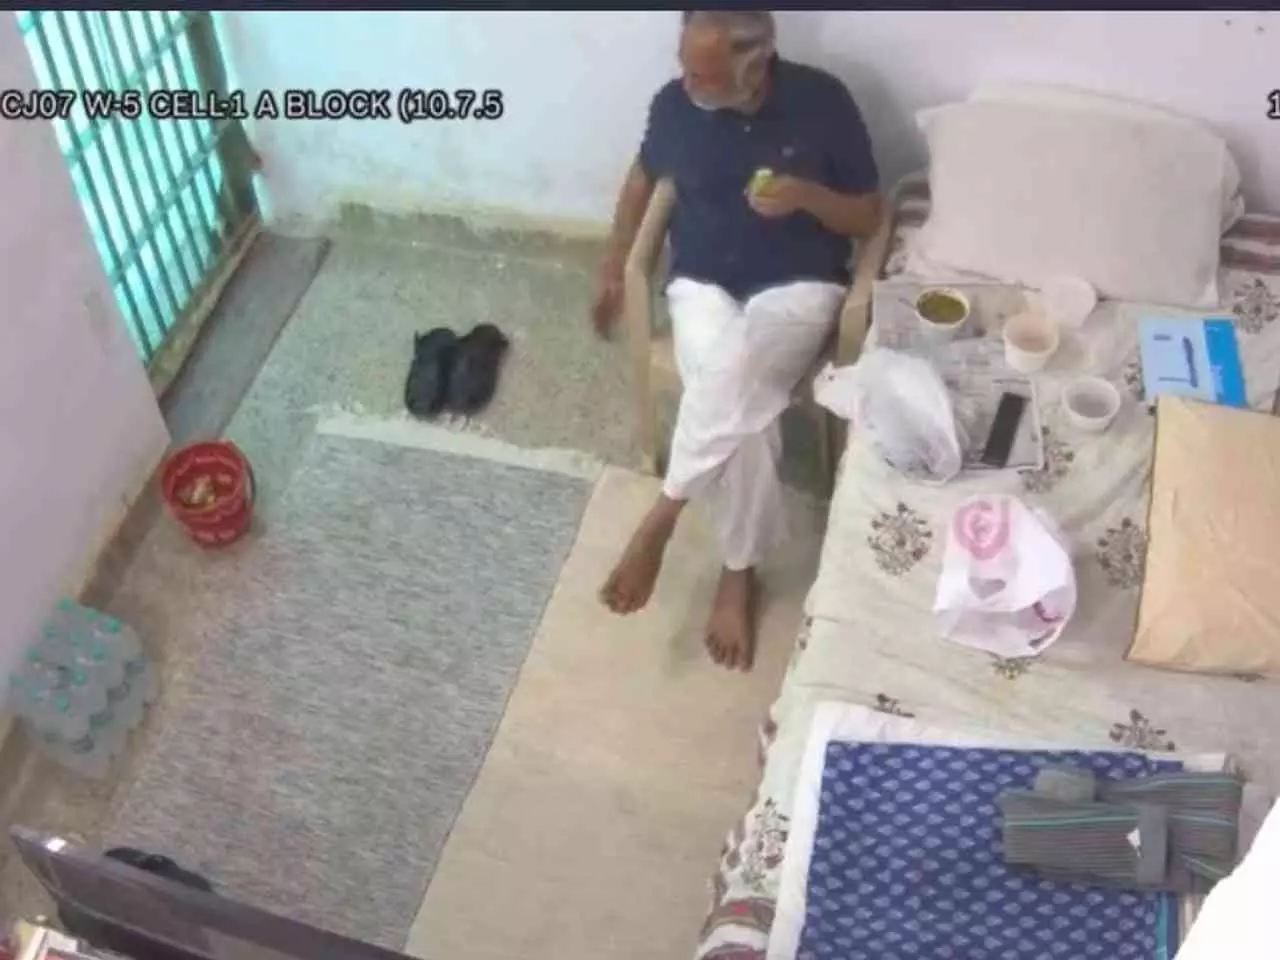 Day after Delhi minister claims 28 kg weight loss, new video shows him eating hearty meal in jail